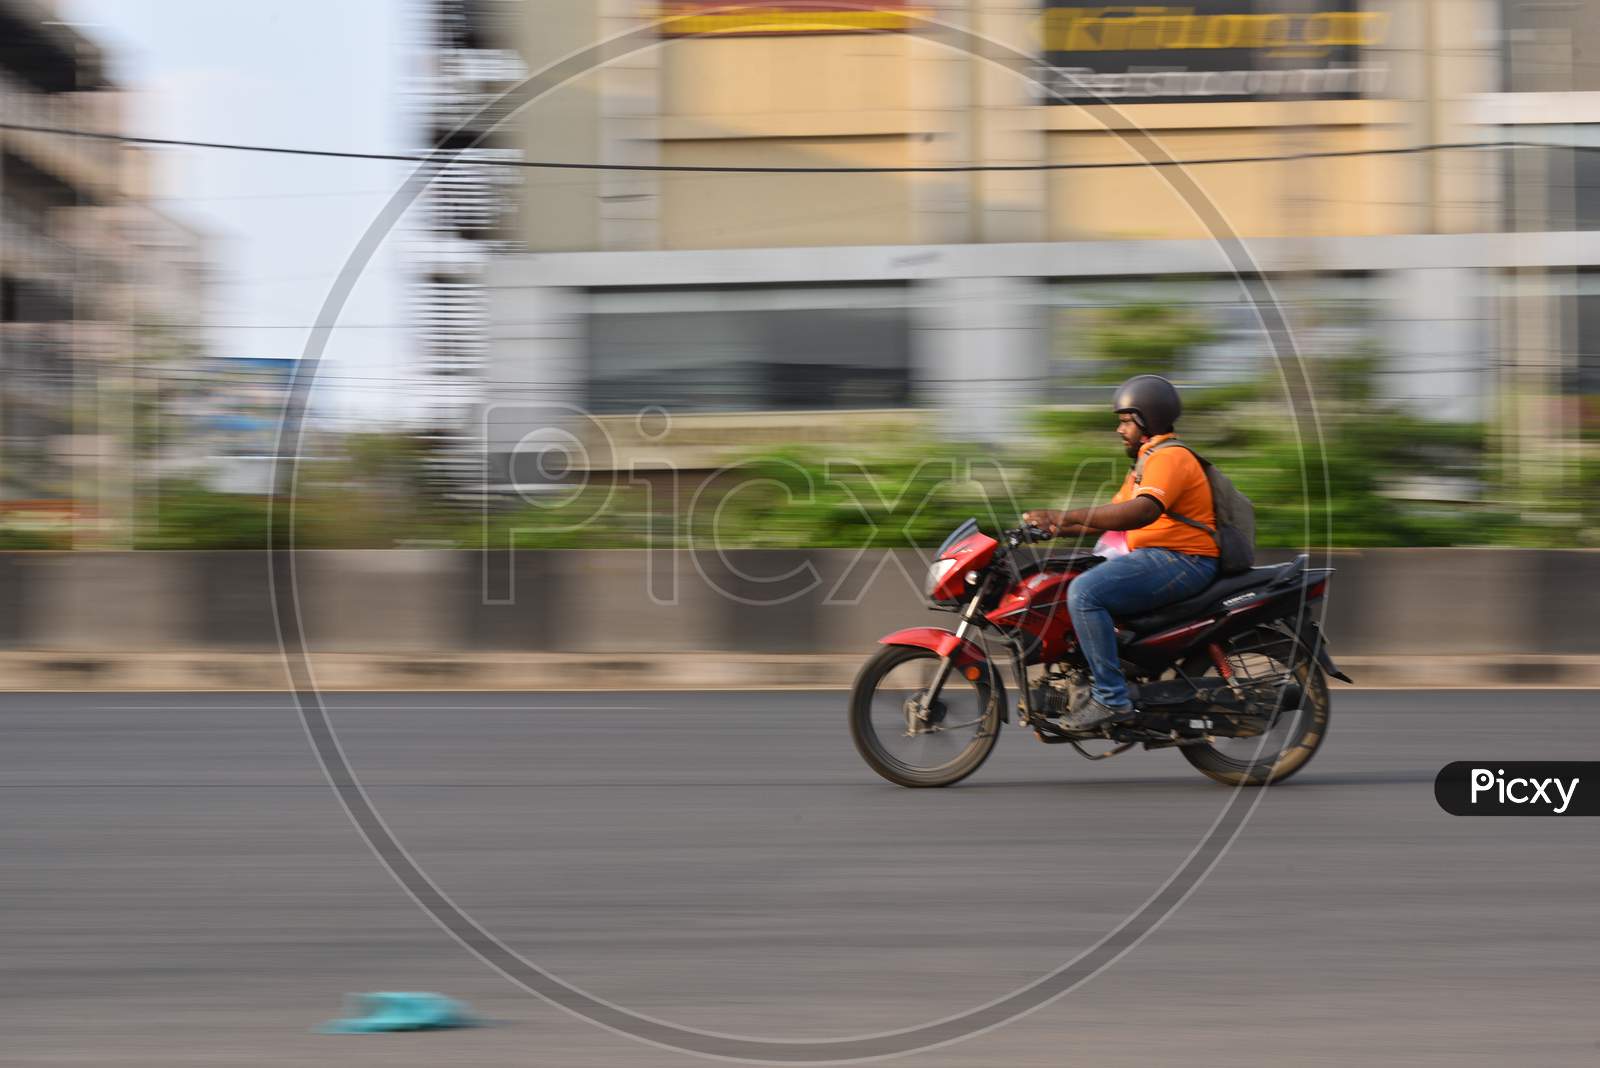 A Zomato delivery boy moves on his vehicle during nationwide lockdown amid coronavirus pandemic, April 8,2020, Hyderabad.